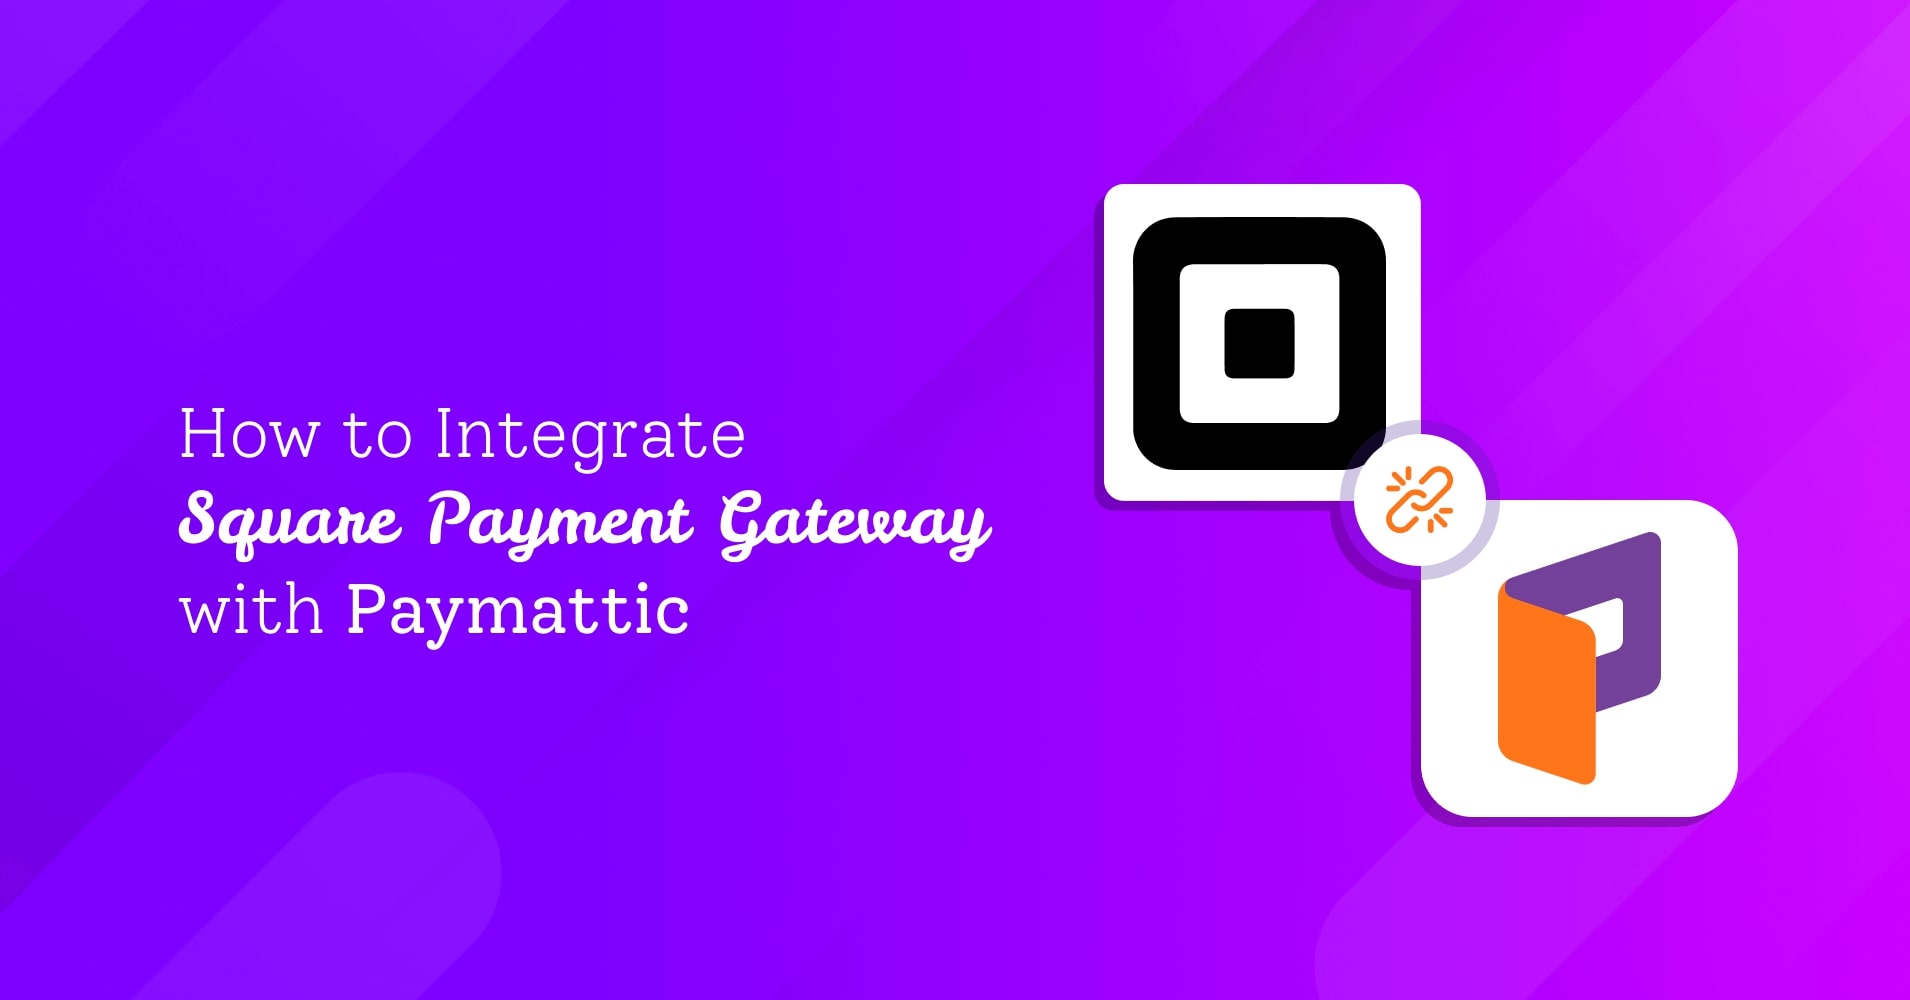 How to Integrate Square Payment Gateway with WordPress?